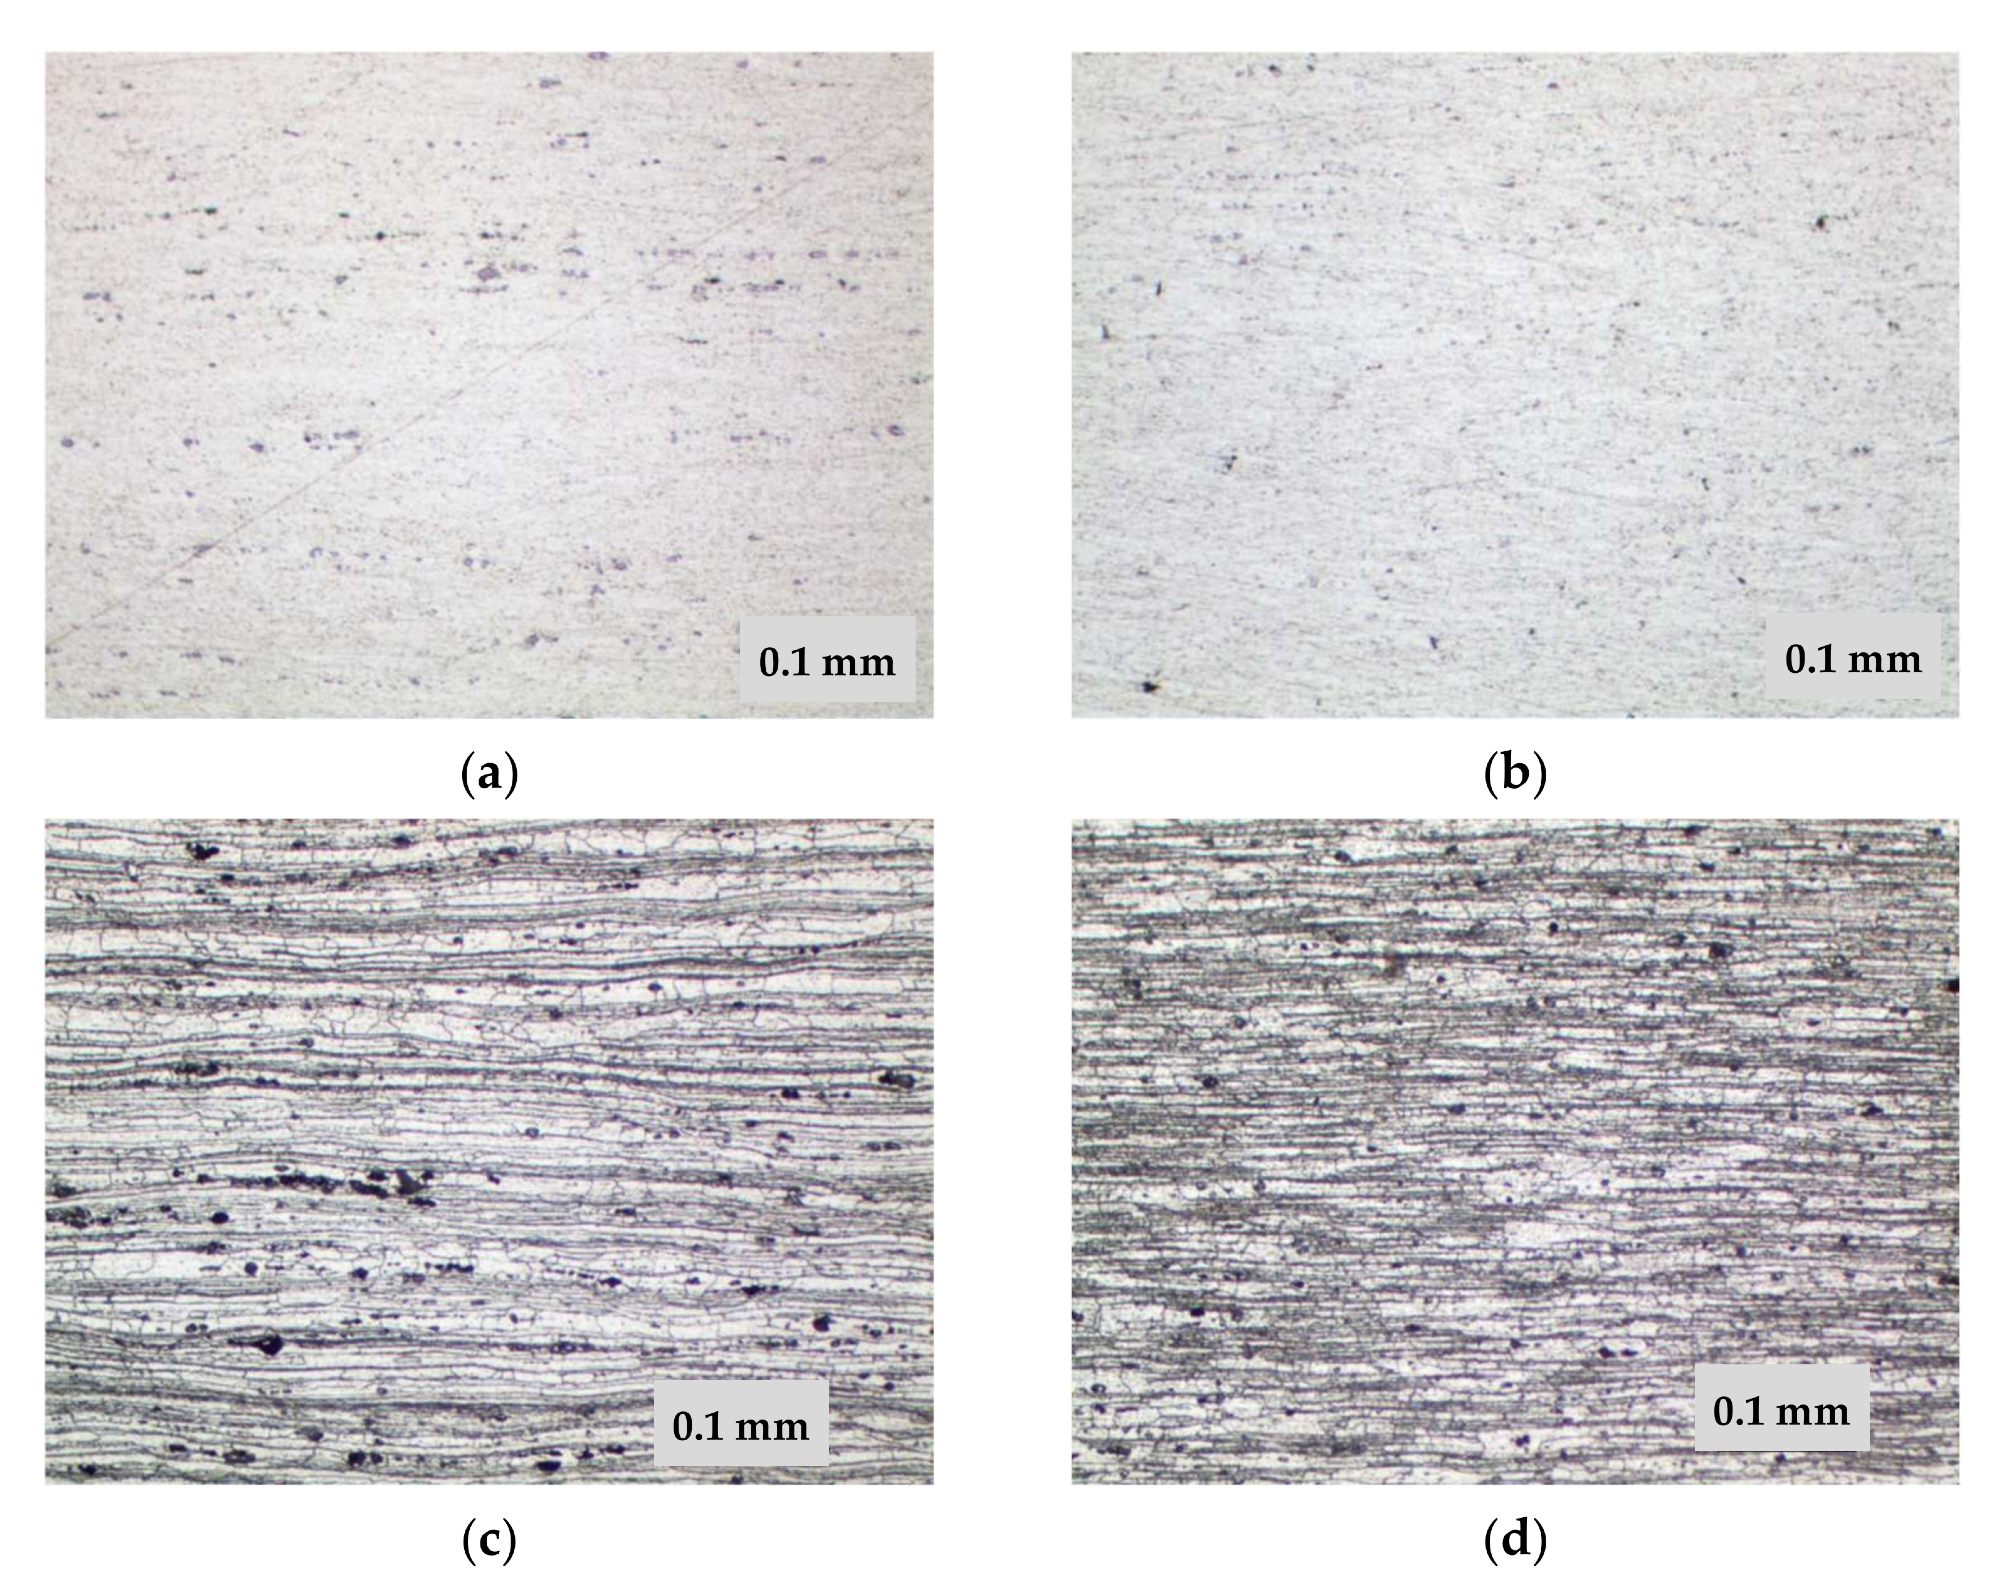 Microstructure of 1420 alloy after standard heat treatment (a,c) and after TVT (b,d), x200: (a,b) not etched surface; (c,d) after etching.